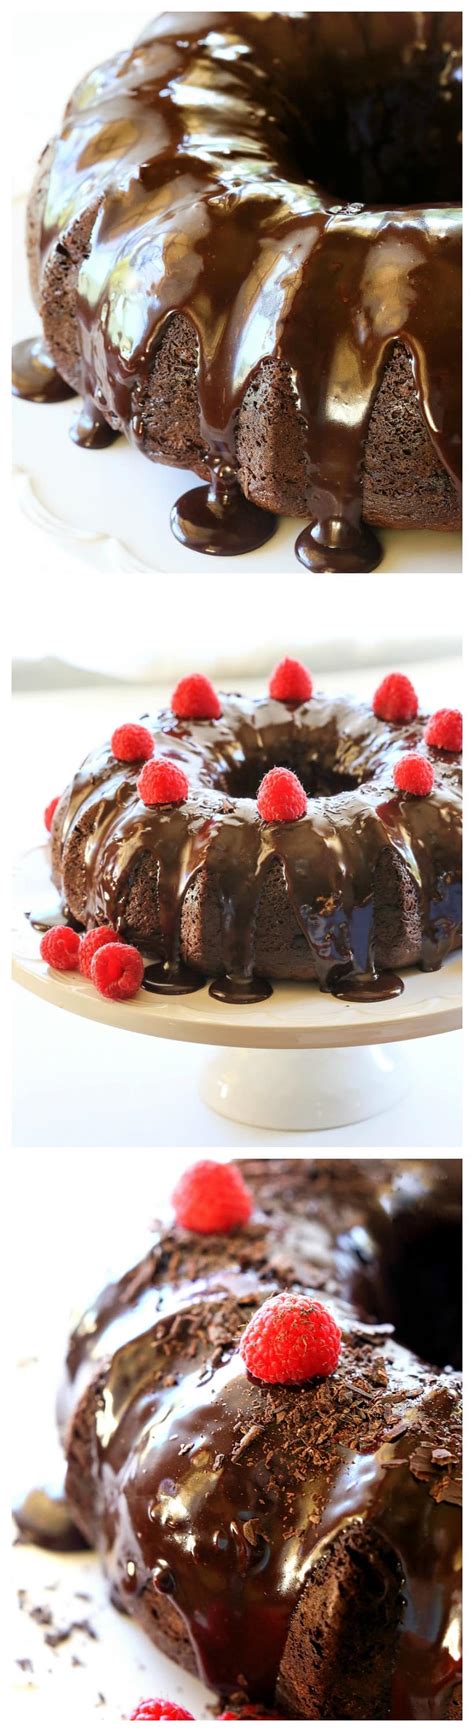 Easy Chocolate Bundt Cake - The Girl Who Ate Everything